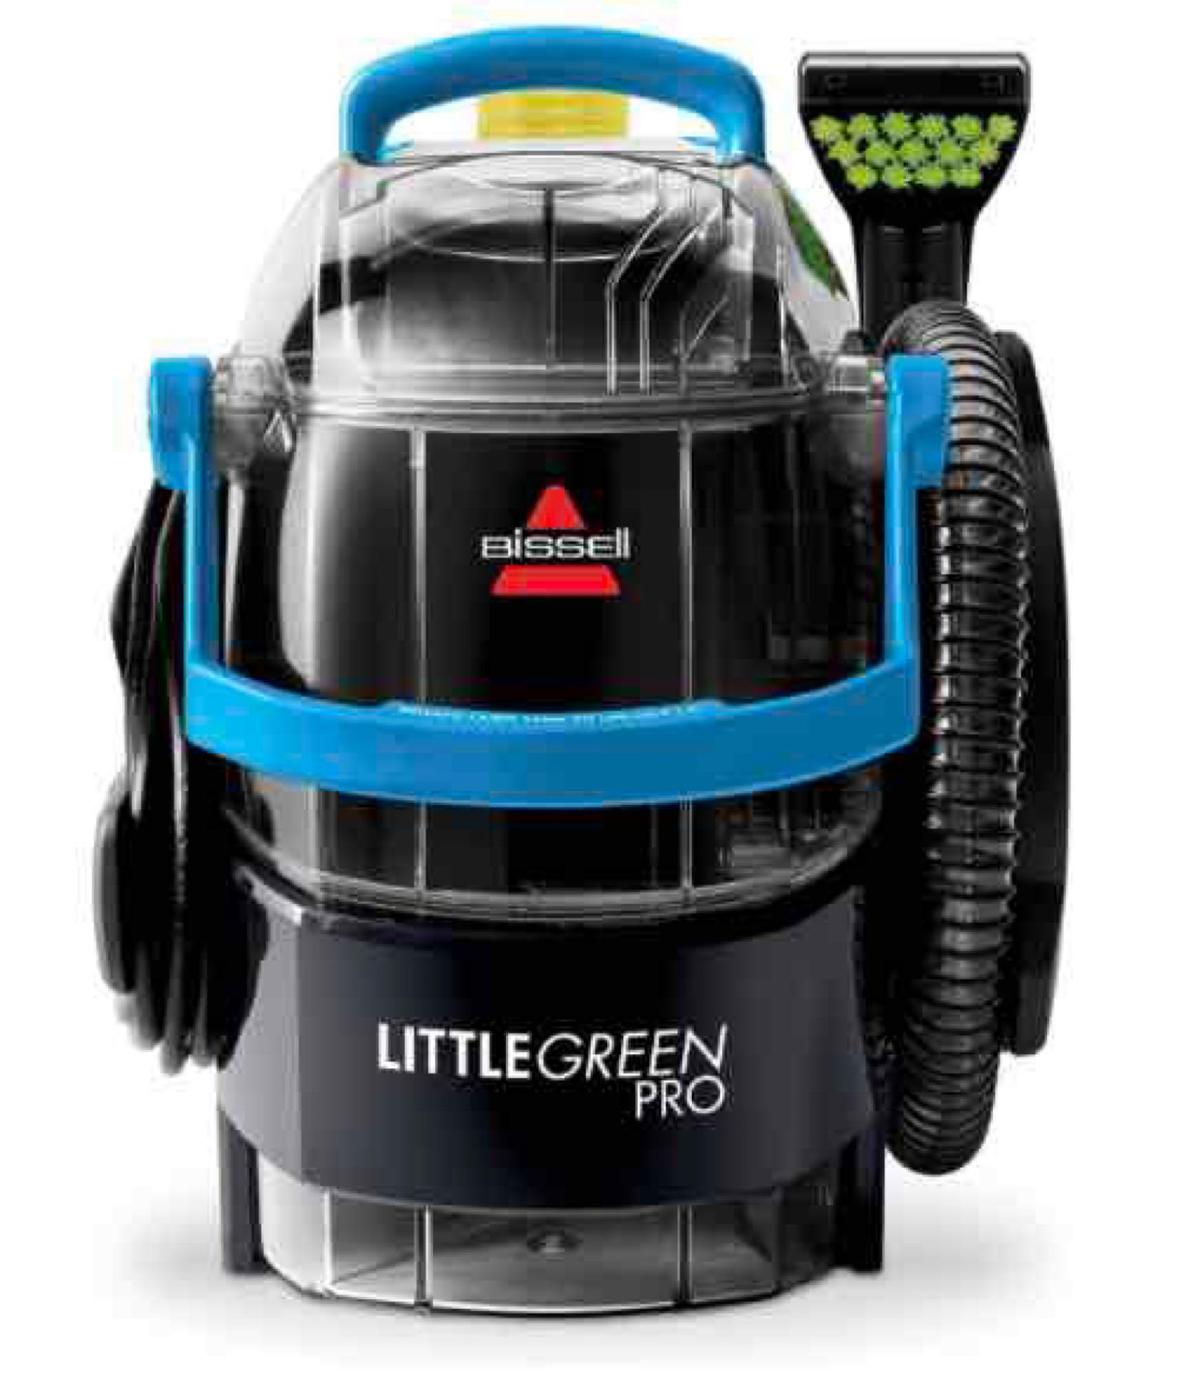 Bissell Little Green Pro